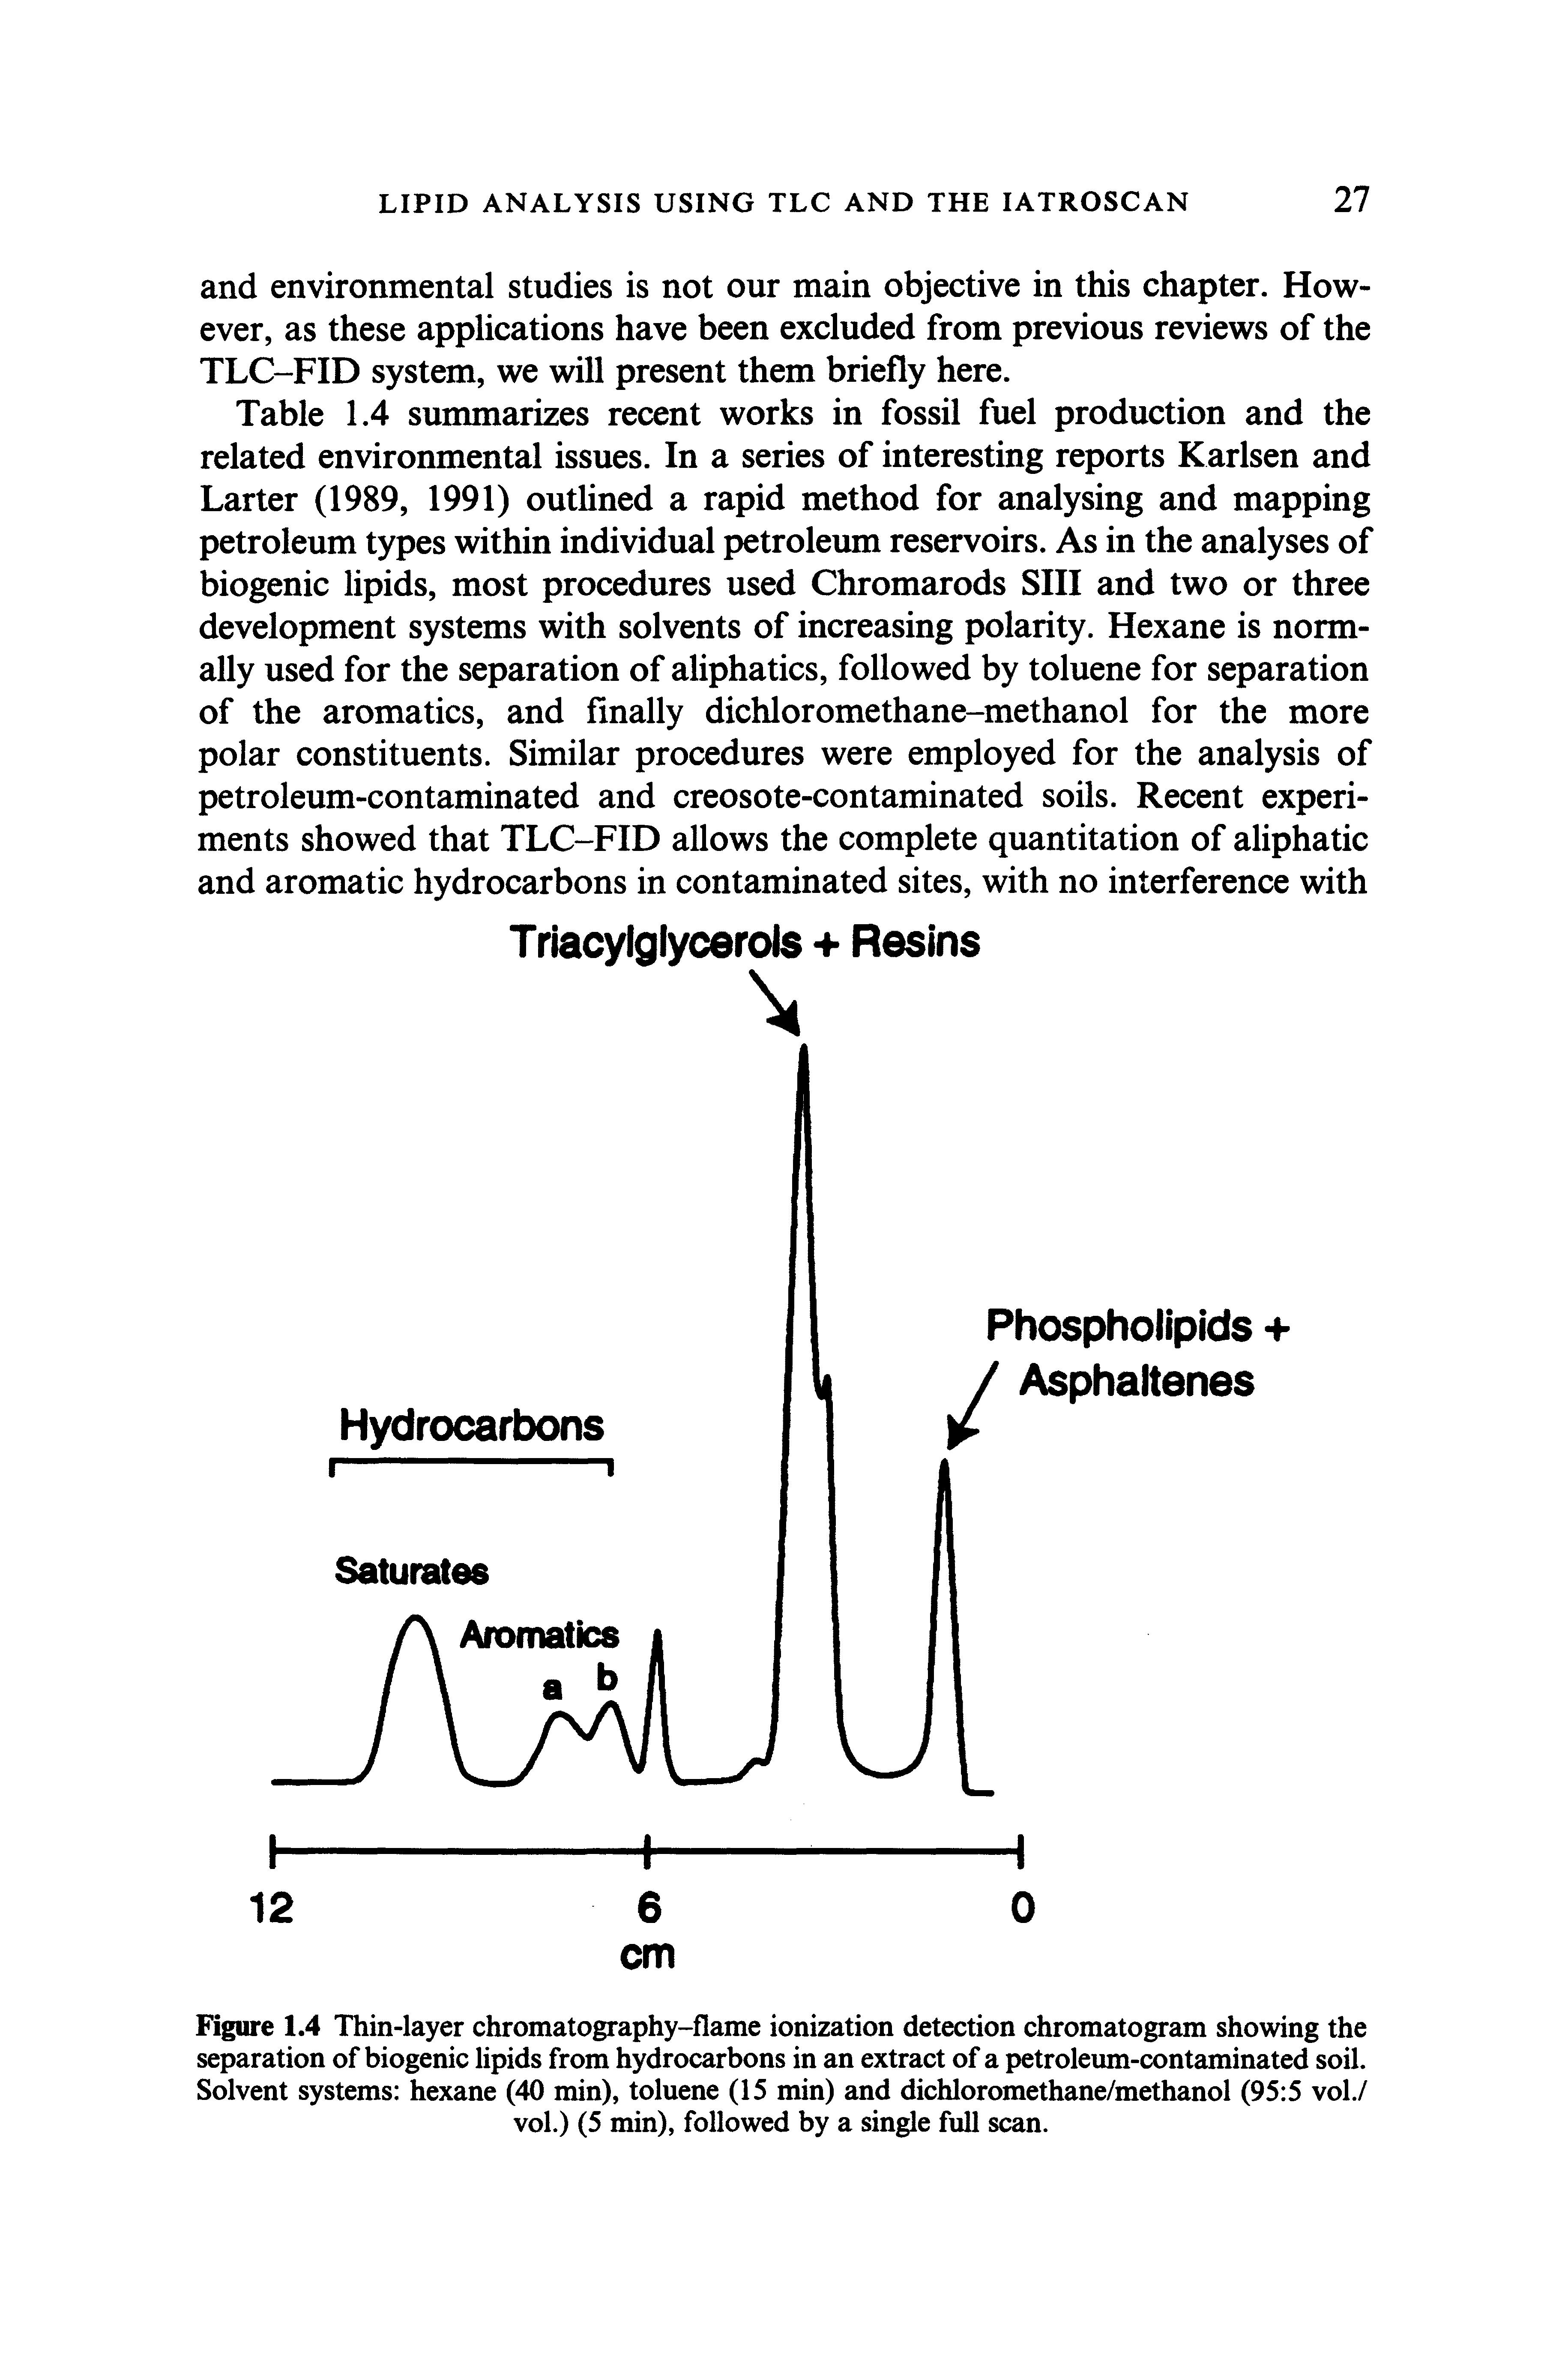 Figure 1.4 Thin-layer chromatography-flame ionization detection chromatogram showing the separation of biogenic lipids from hydrocarbons in an extract of a petroleum-contaminated soil. Solvent systems hexane (40 min), toluene (15 min) and dichloromethane/methanol (95 5 vol./ vol.) (5 min), followed by a single full scan.